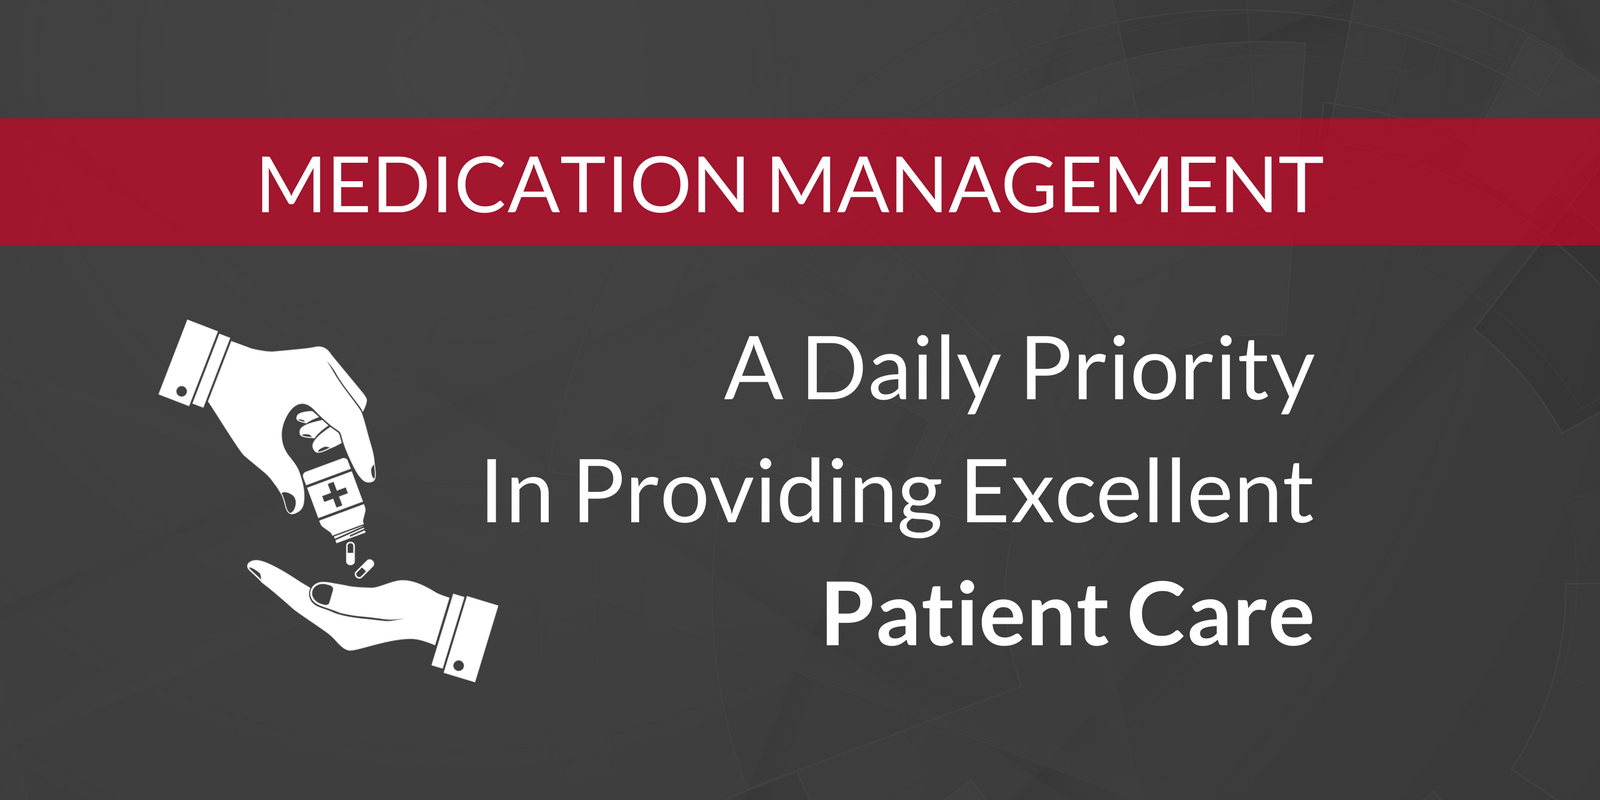 Medication Management_ A Daily Priority In Providing Excellent Patient Care-1